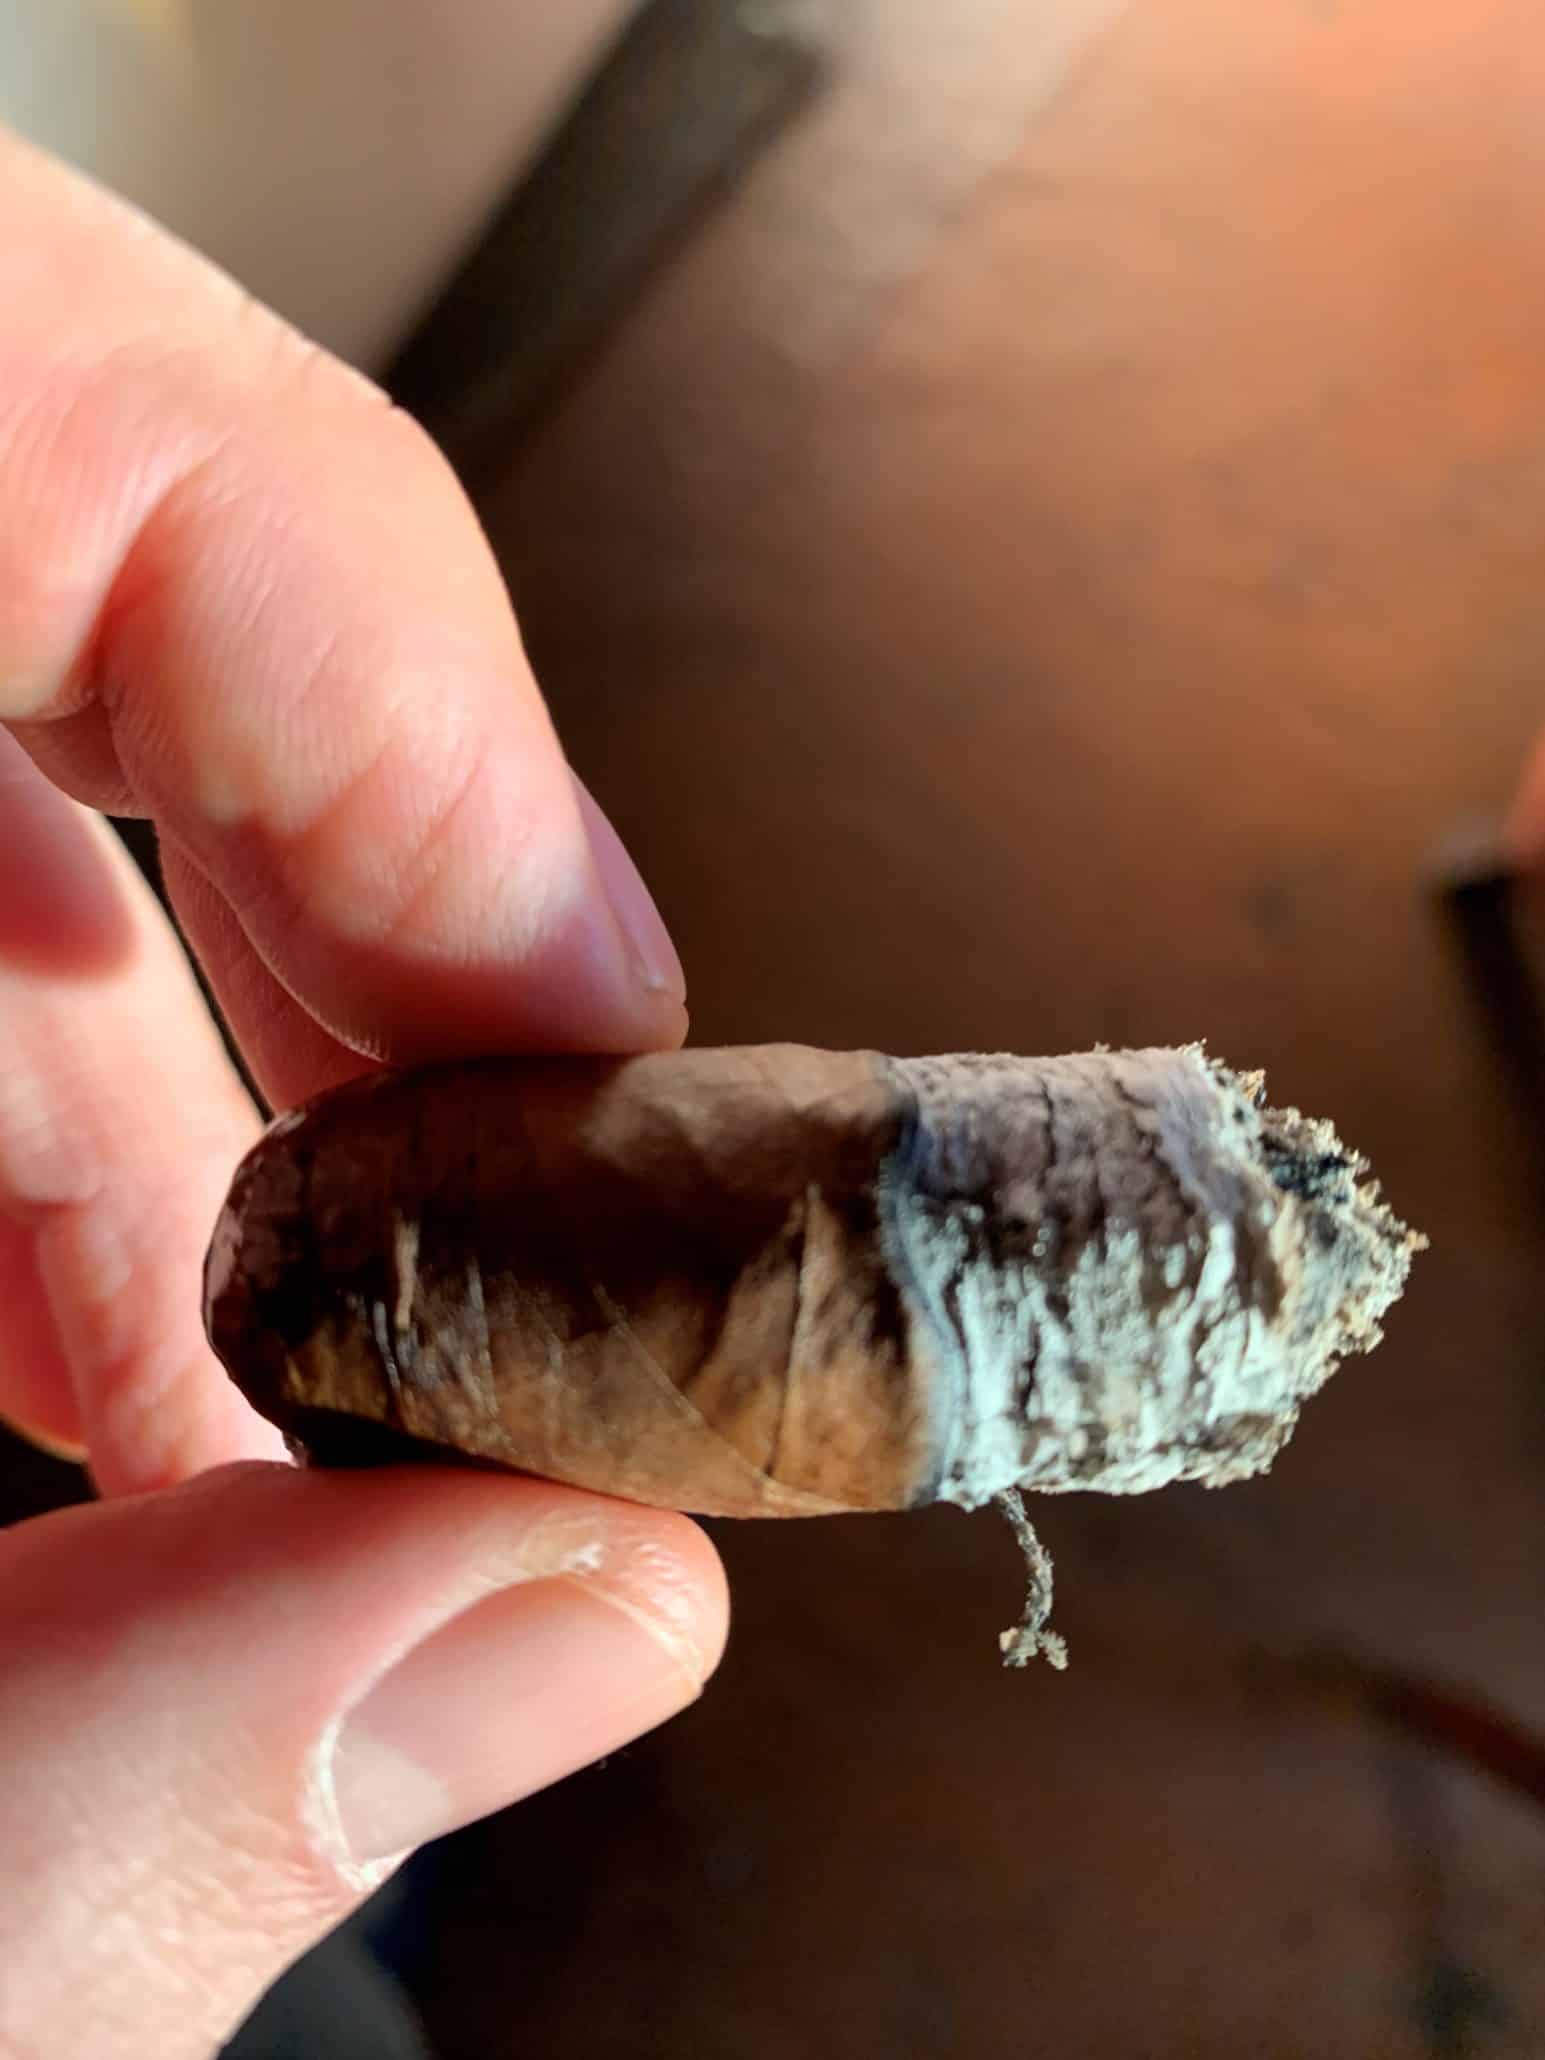 A cigar smoked down to the nub, which can be a pet peeve for some.